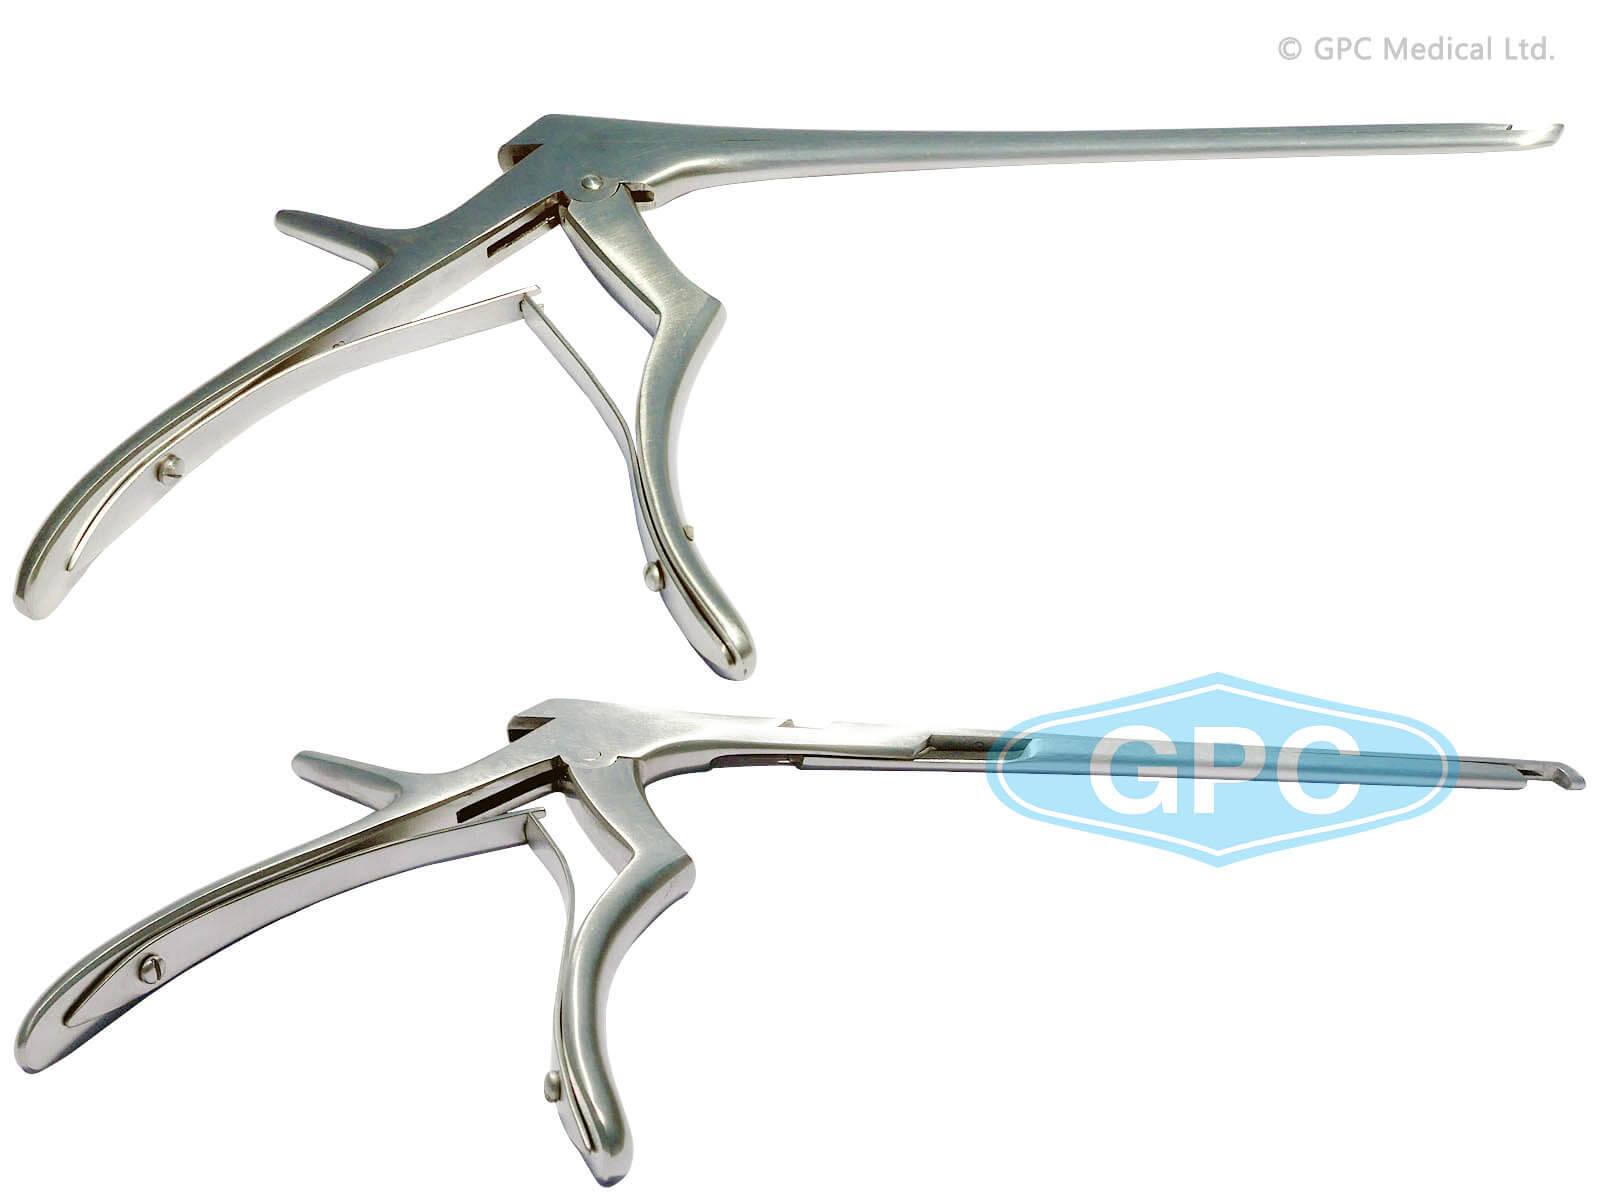 Ferris Smith (Kerrison) Sphenoidal Punch Forceps Up/Down-Angle 45°